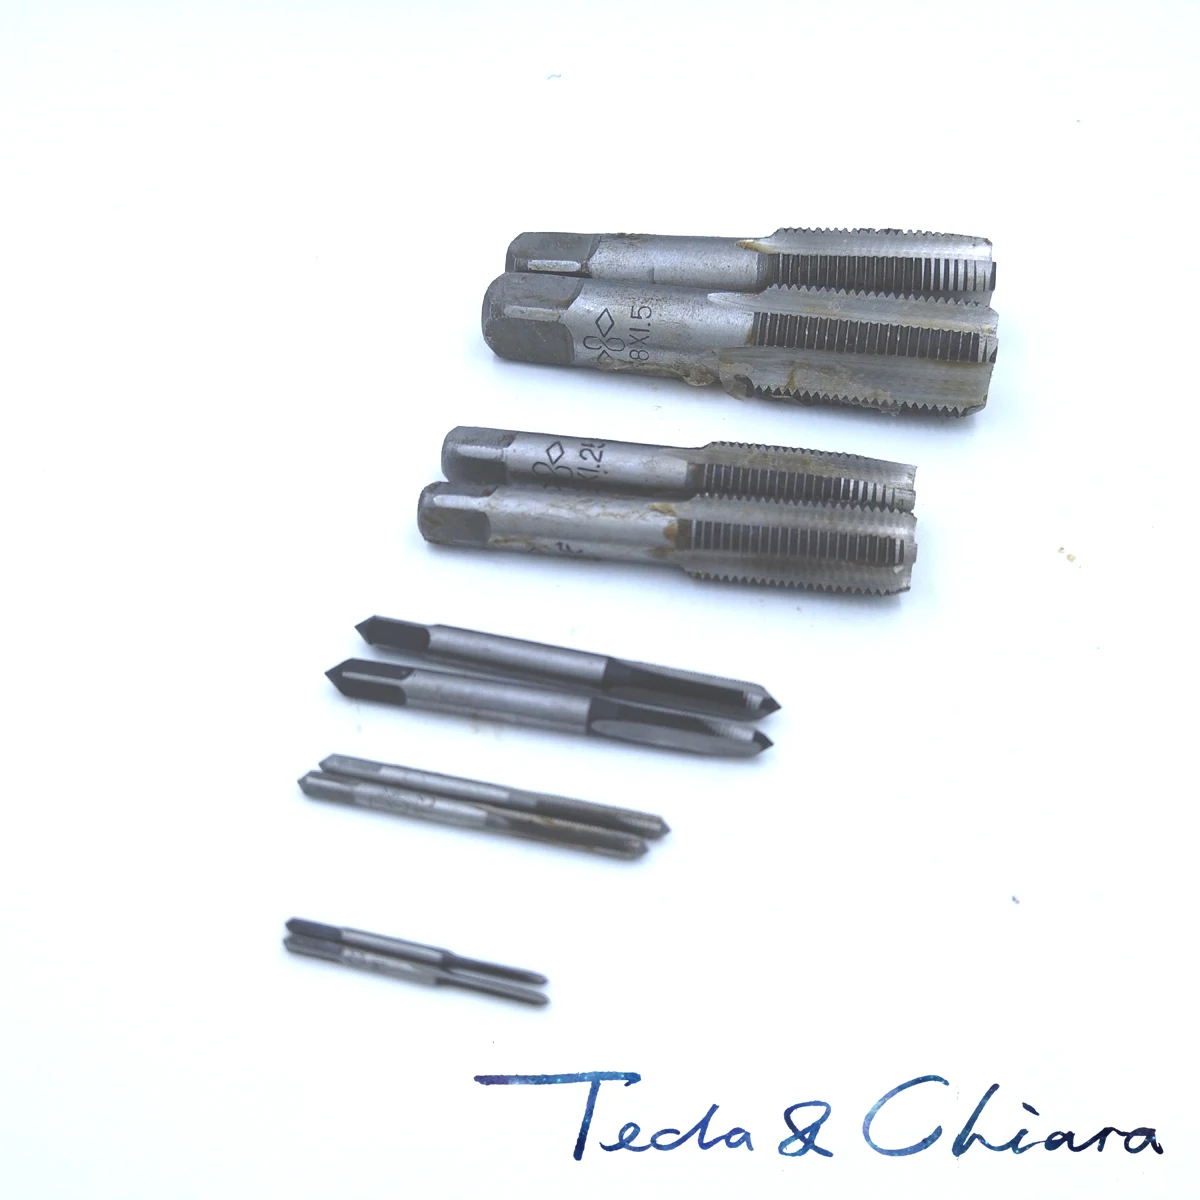 1Set New 18mm x 1.5 Metric Taper and Plug Tap M18 x 1.5mm Pitch For Mold Machining Free shipping